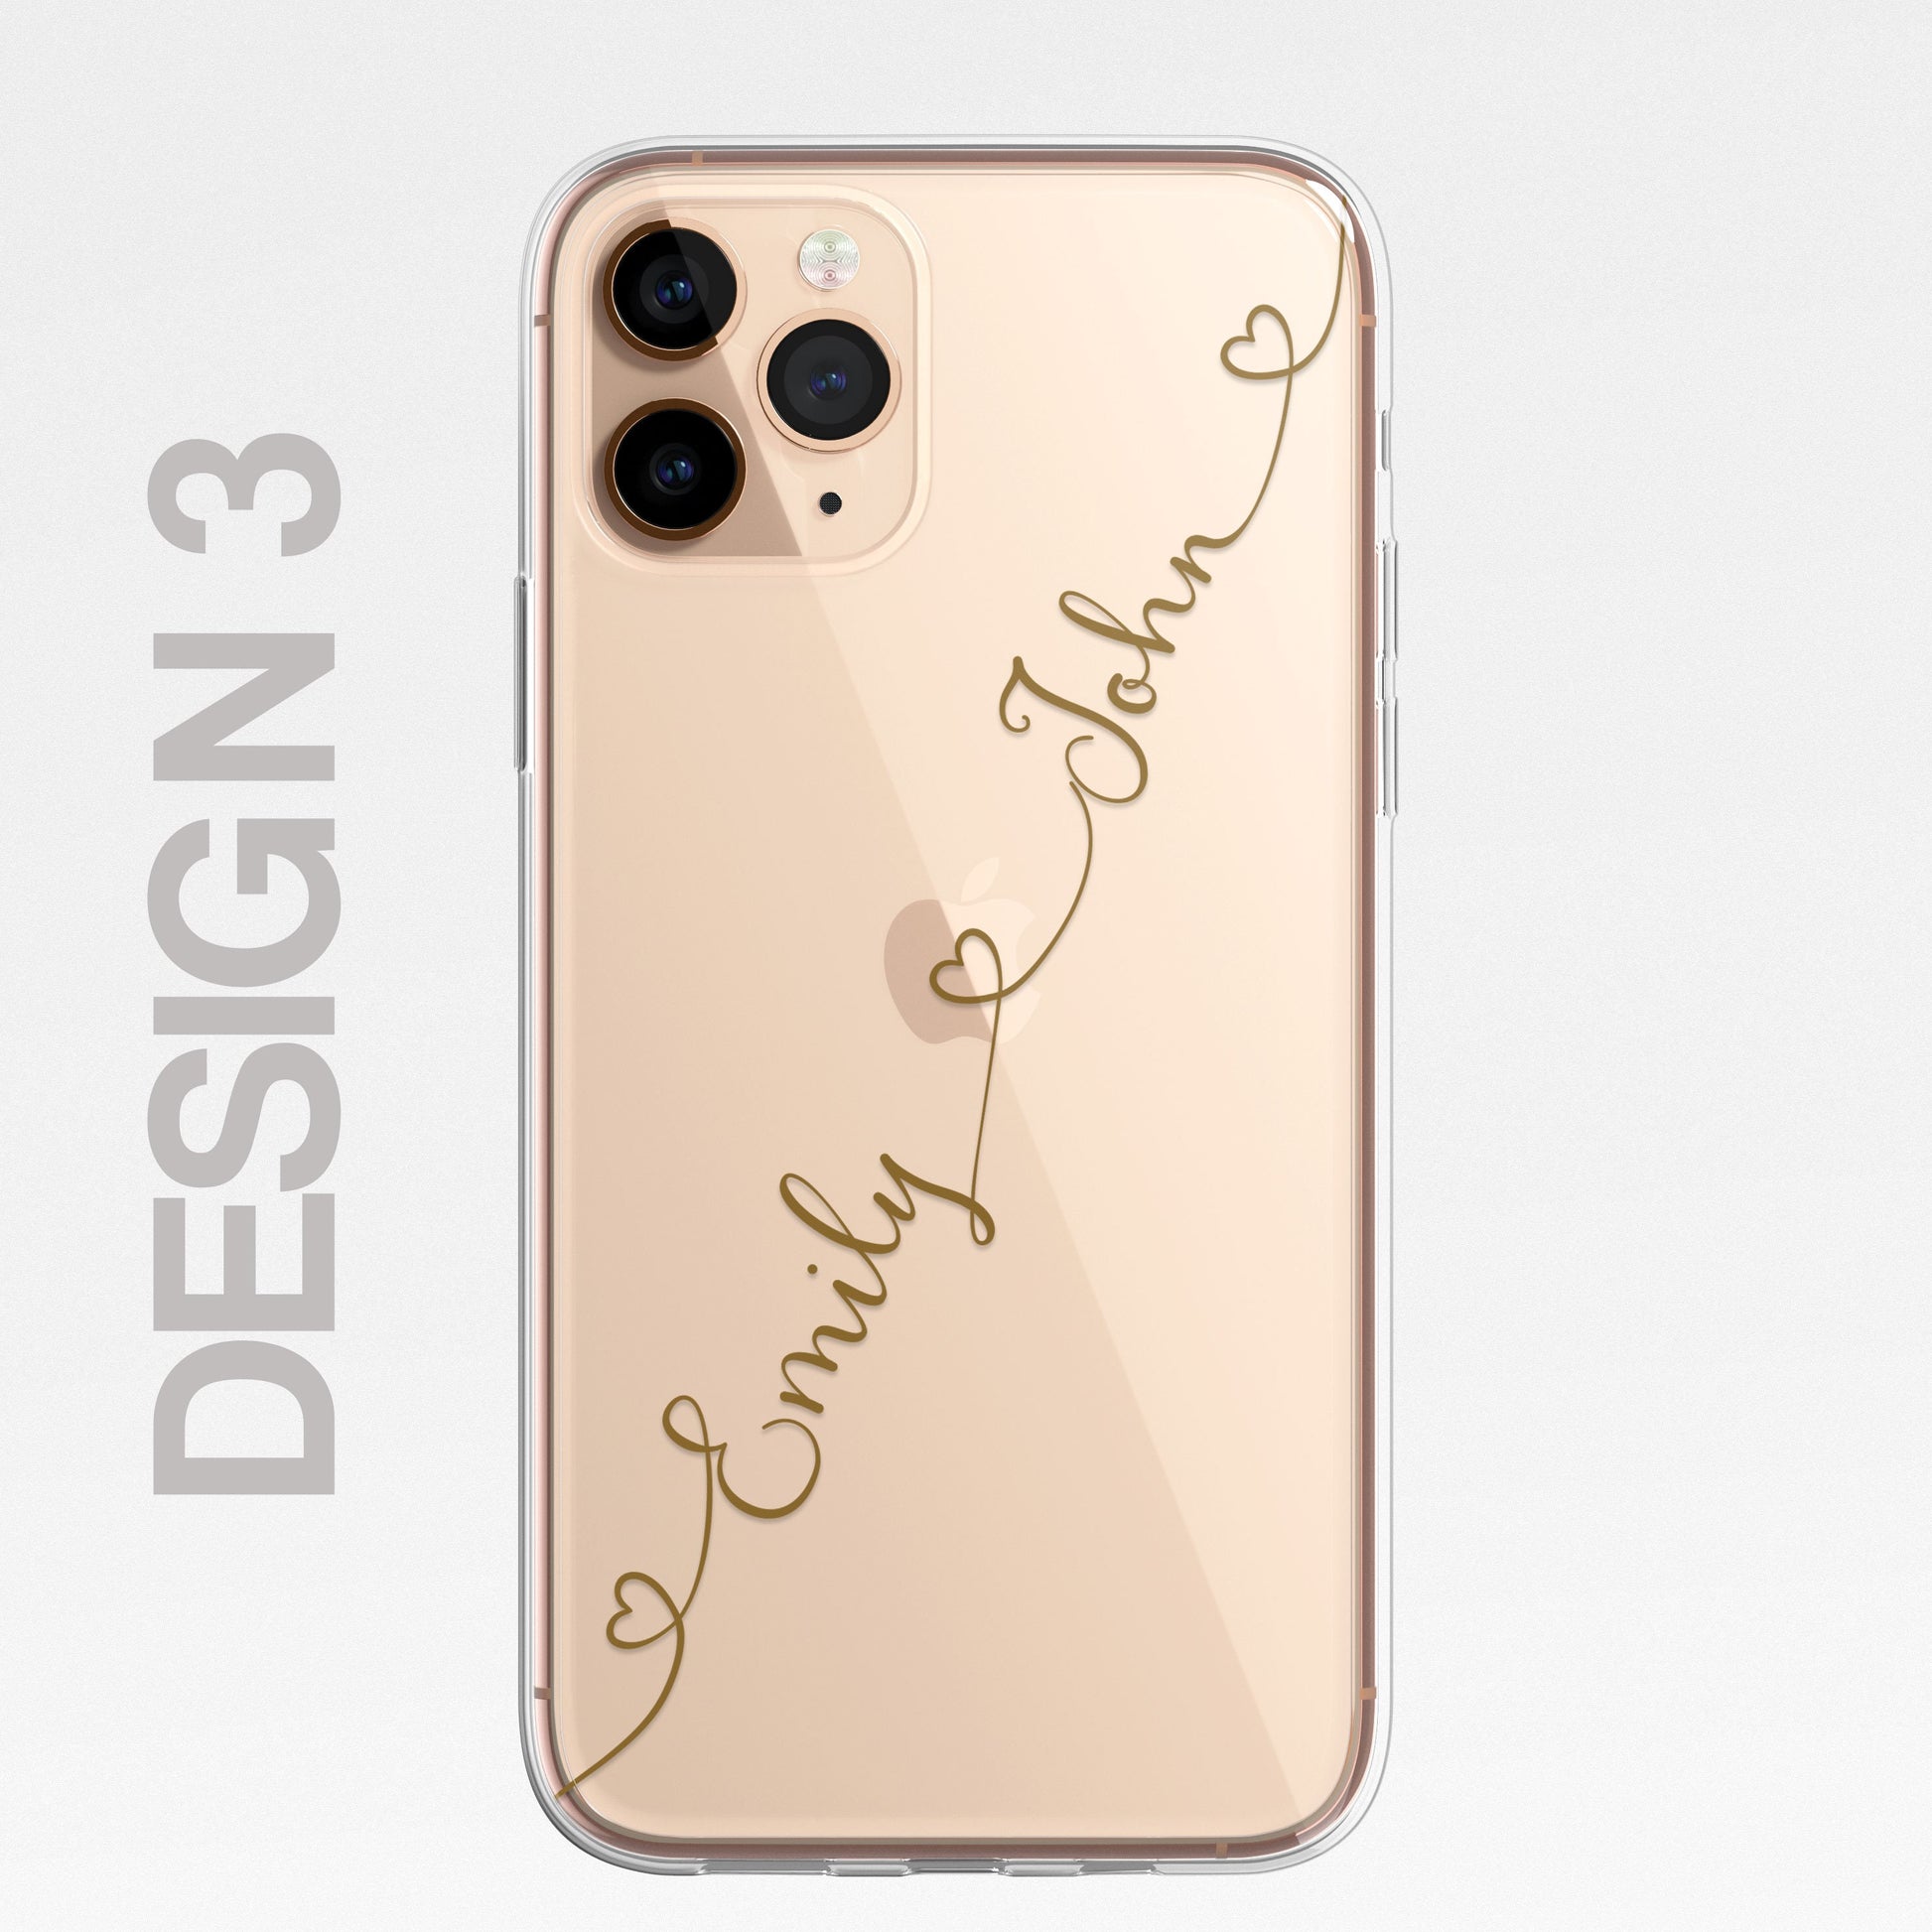 iPhone Case Personalised Heart Script Custom Silicone CLEAR Phone Cover Cursive Pretty for iPhone and Samsung